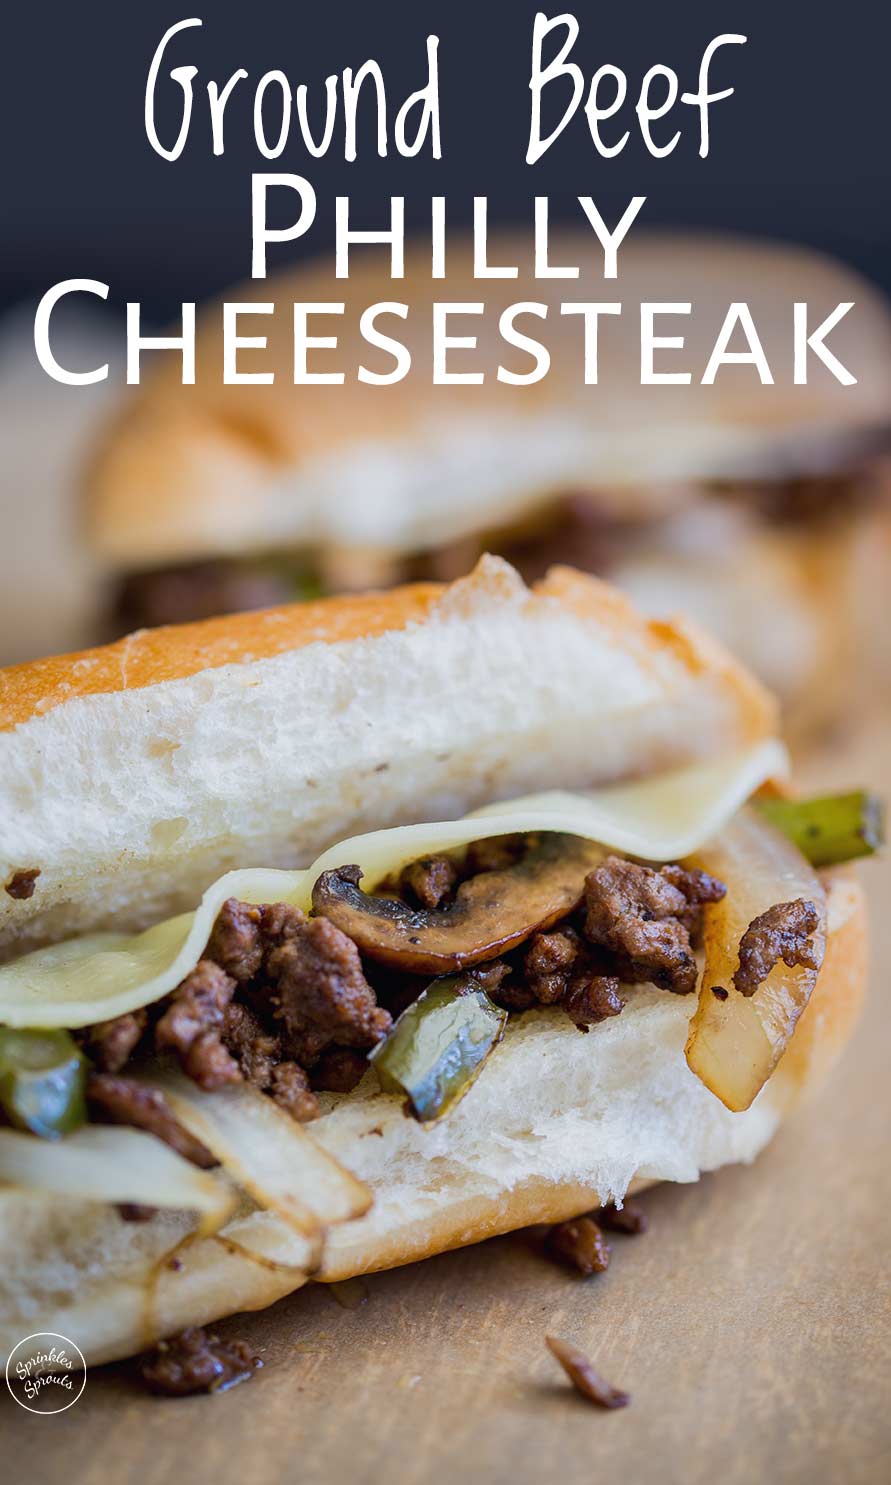 close up on the ground beef philly cheesesteak with text overplayed